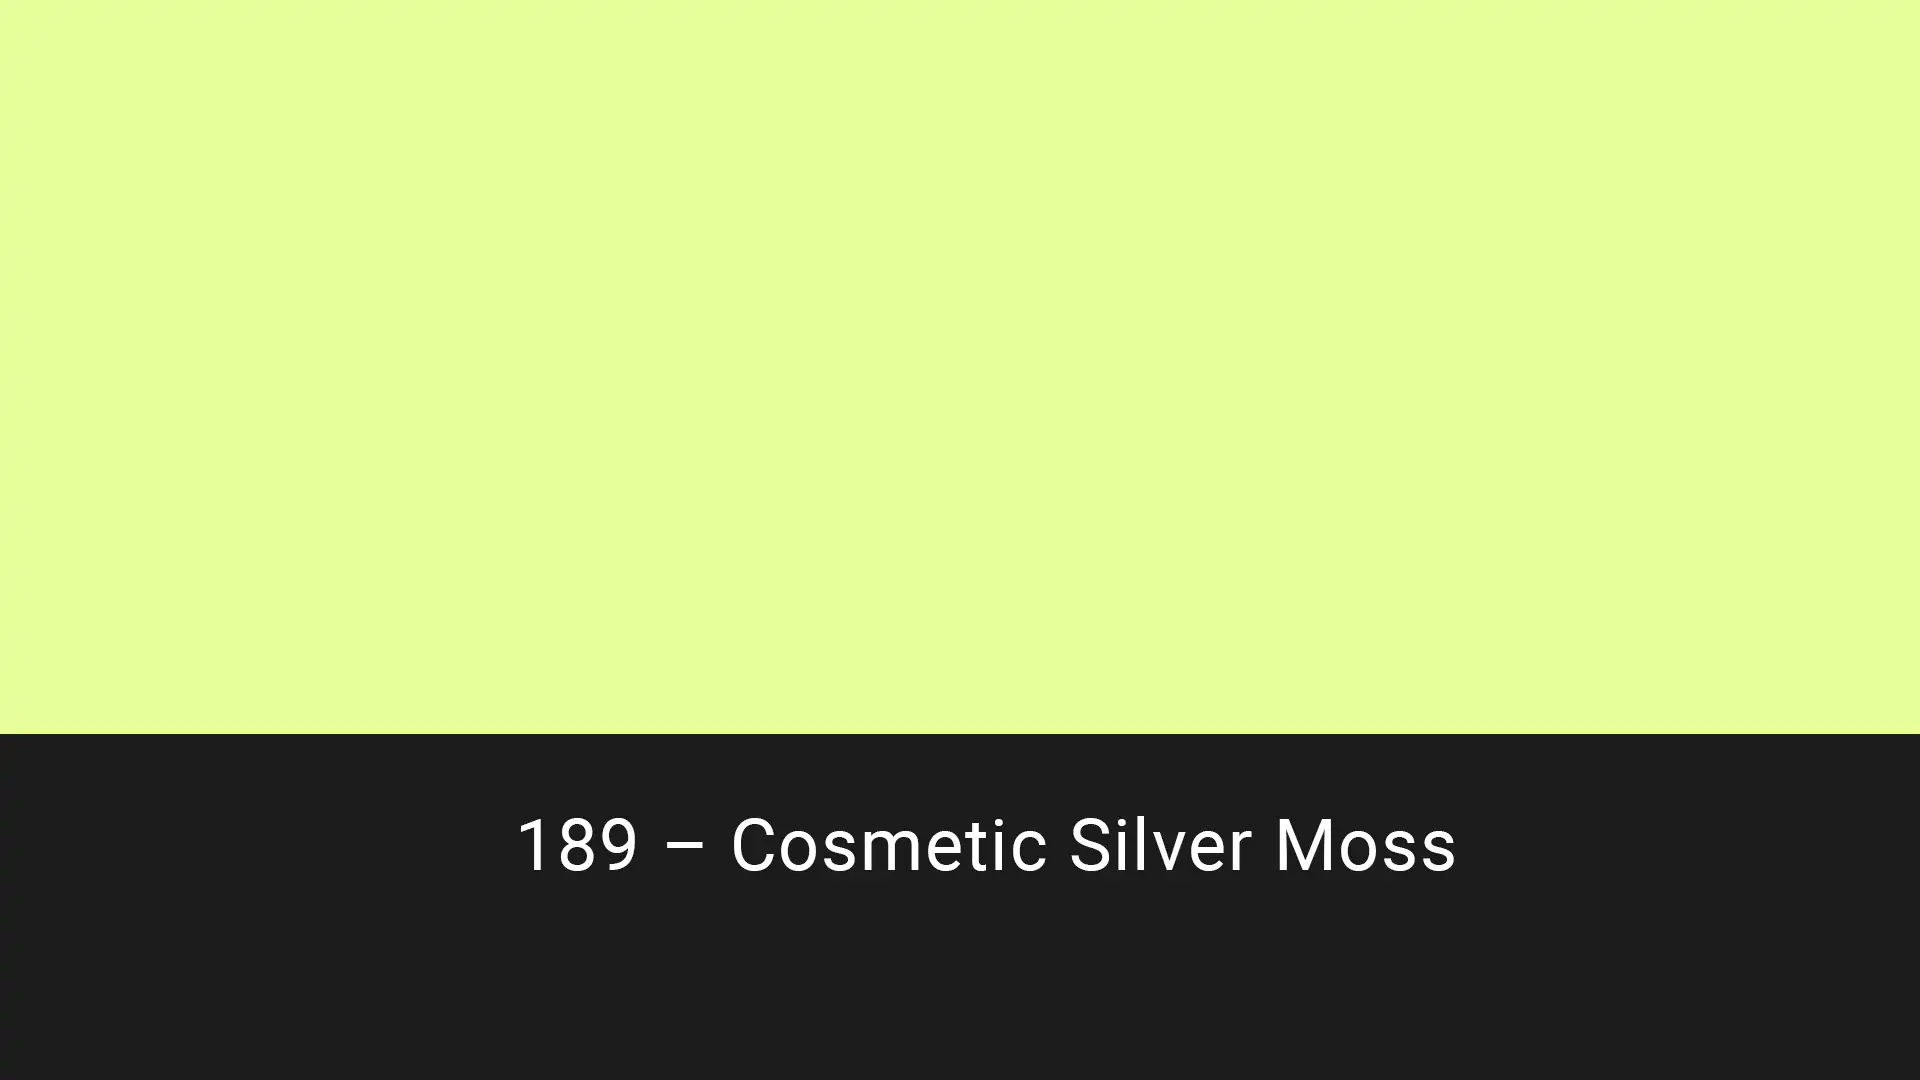 Cotech filters 189 Cosmetic Silver Moss